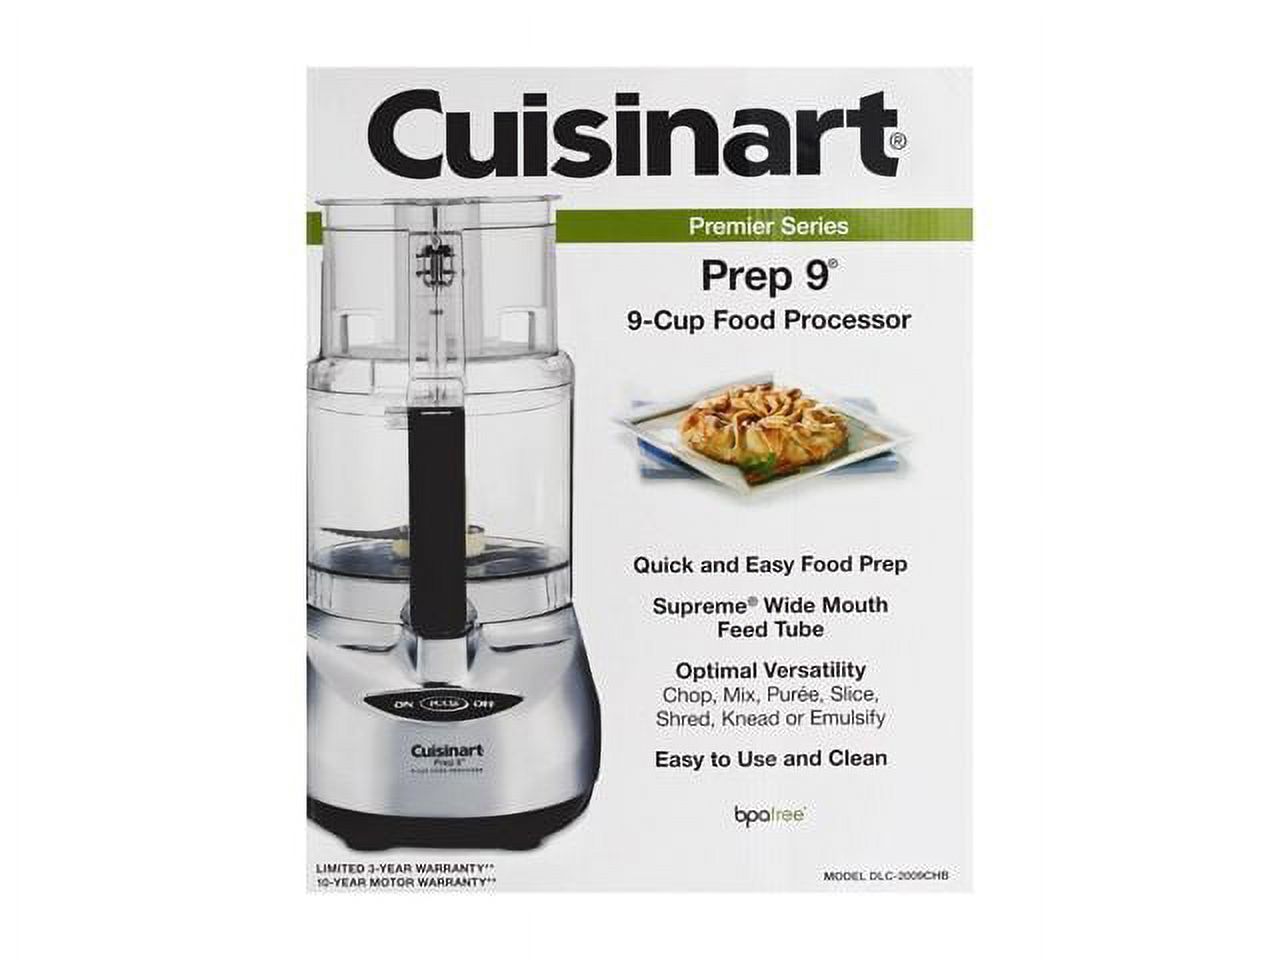 Cuisinart Prep 9 9-Cup Food Processor, Stainless Steel (DLC-2009CHBMY) - image 2 of 2